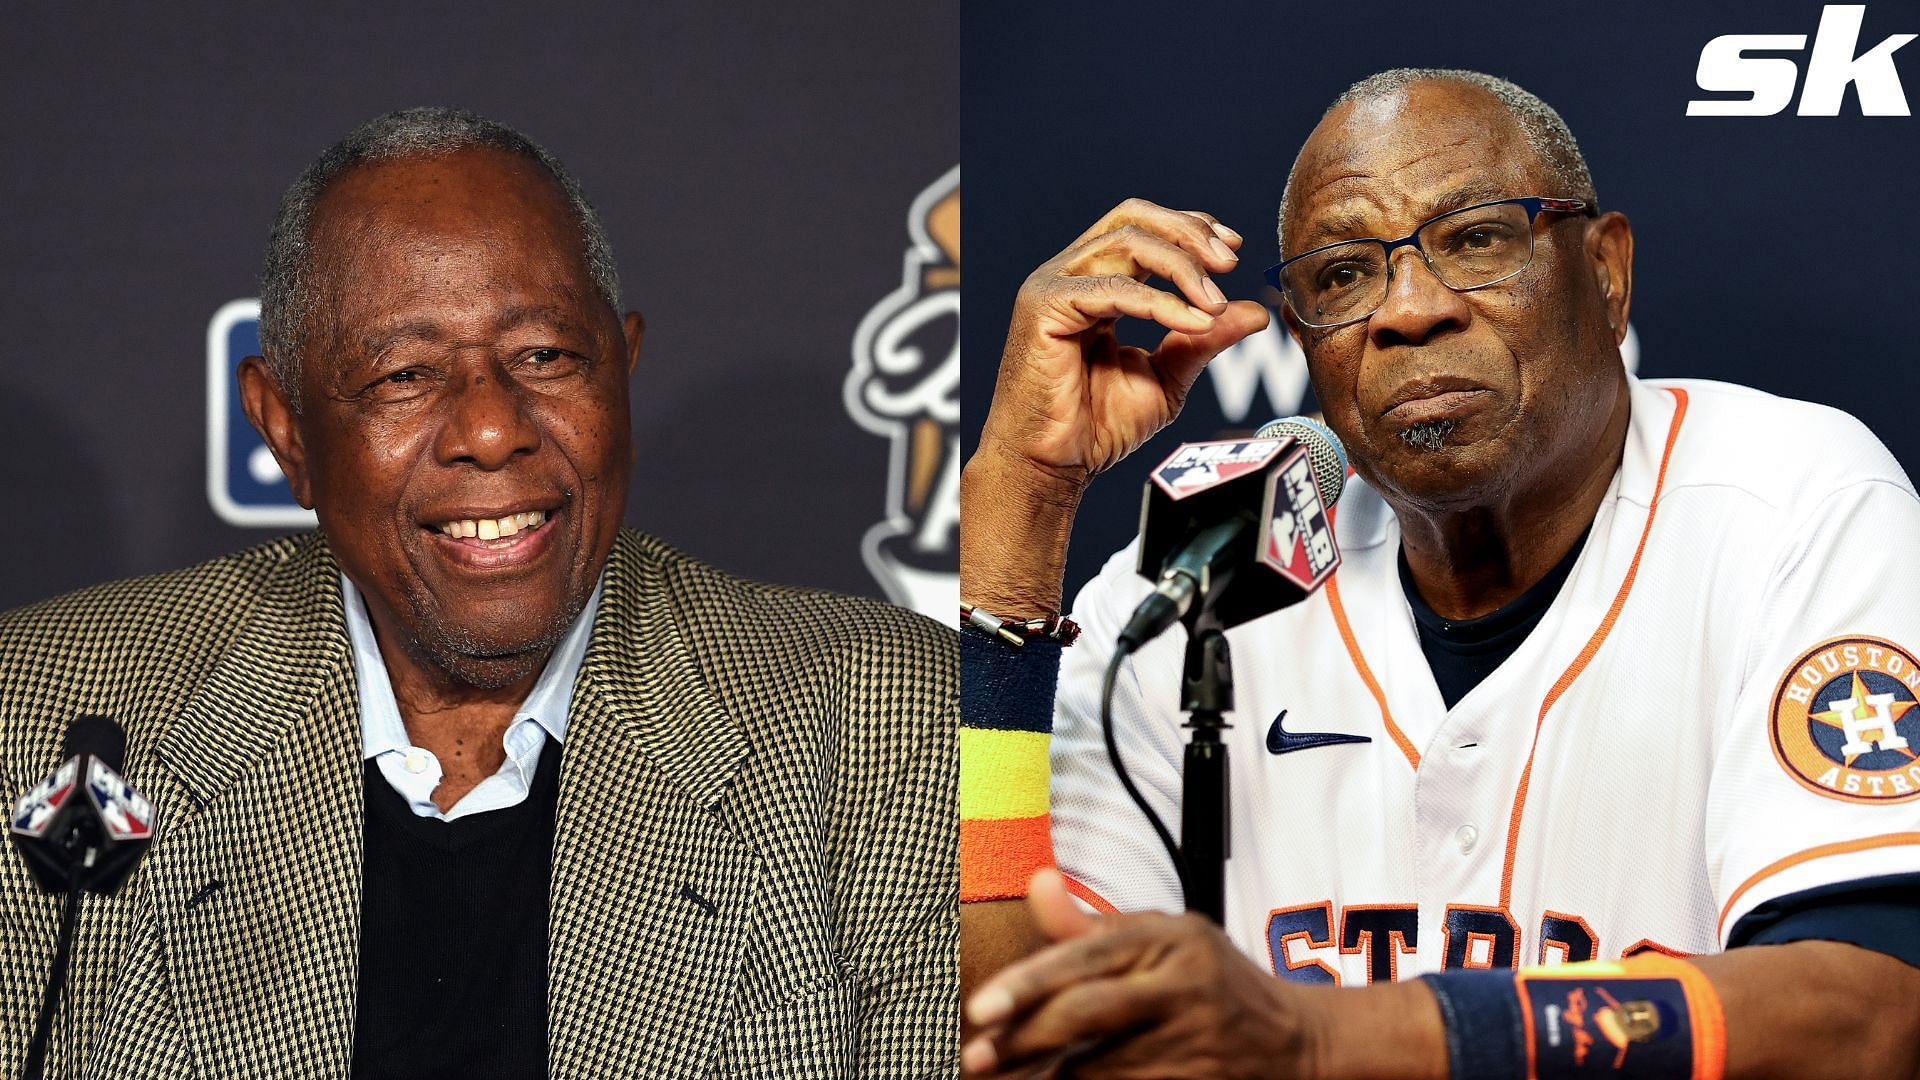 Houston Astros manager Dusty Baker shares sound advice from MLB legend Hank Aaron